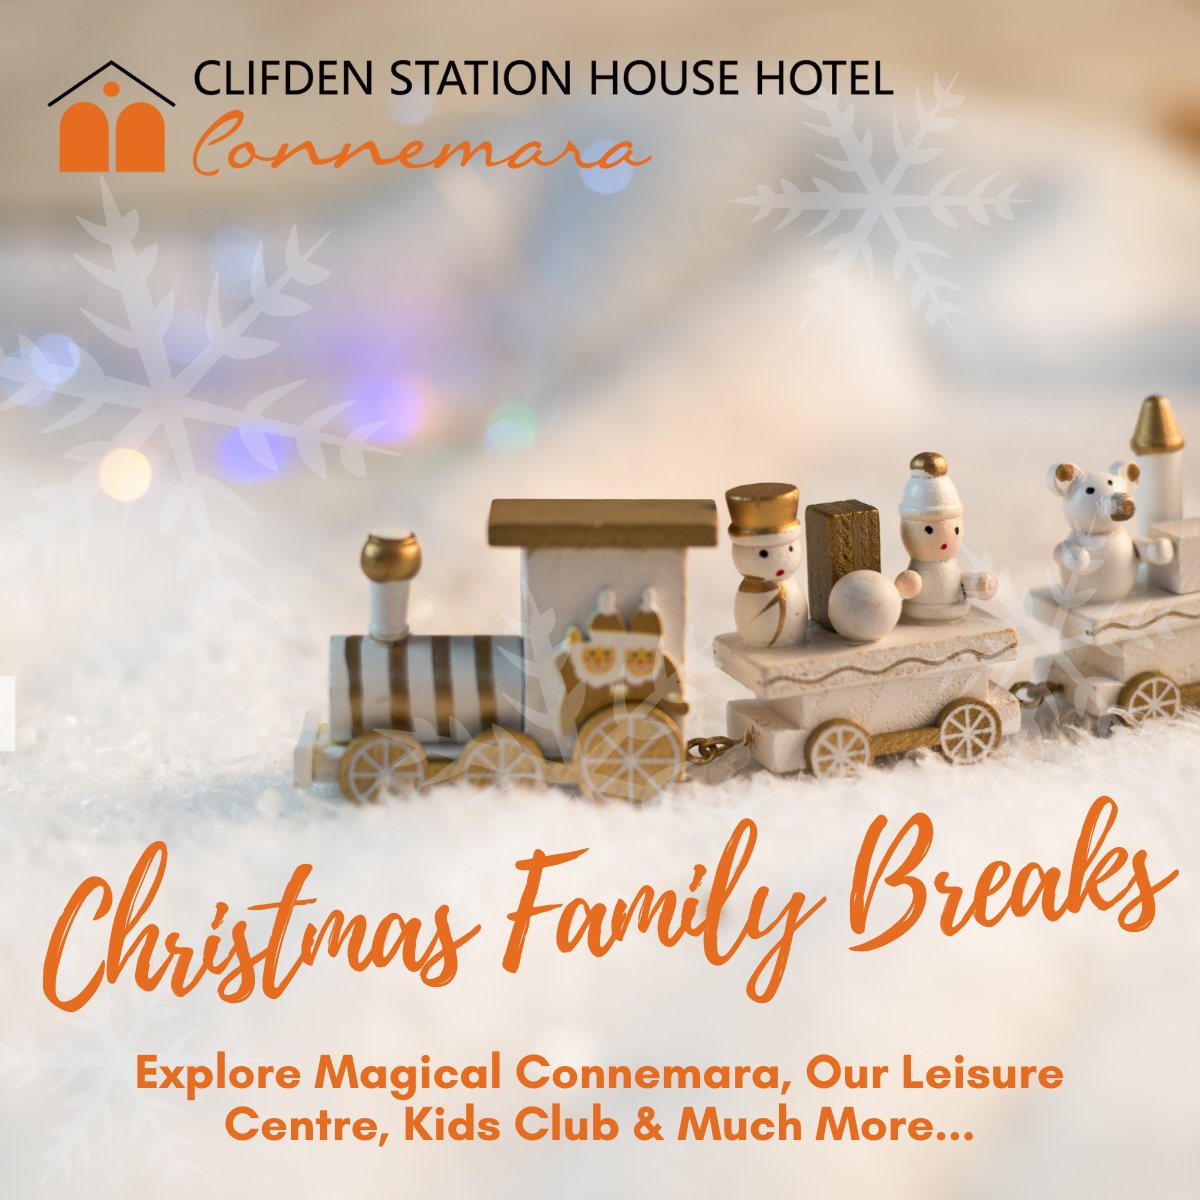 Christmas Family Break Offer. 🎄 Spend 3 nights dinner, B&B for just €250 per night, based on a large Family Room for 2 Adults and 2 Kids aged up to 16. Or book a std room for 2 Adults and 1 Child for only €228 per night. Call 095-21699 to Book Now or: bit.ly/3mFrc8G